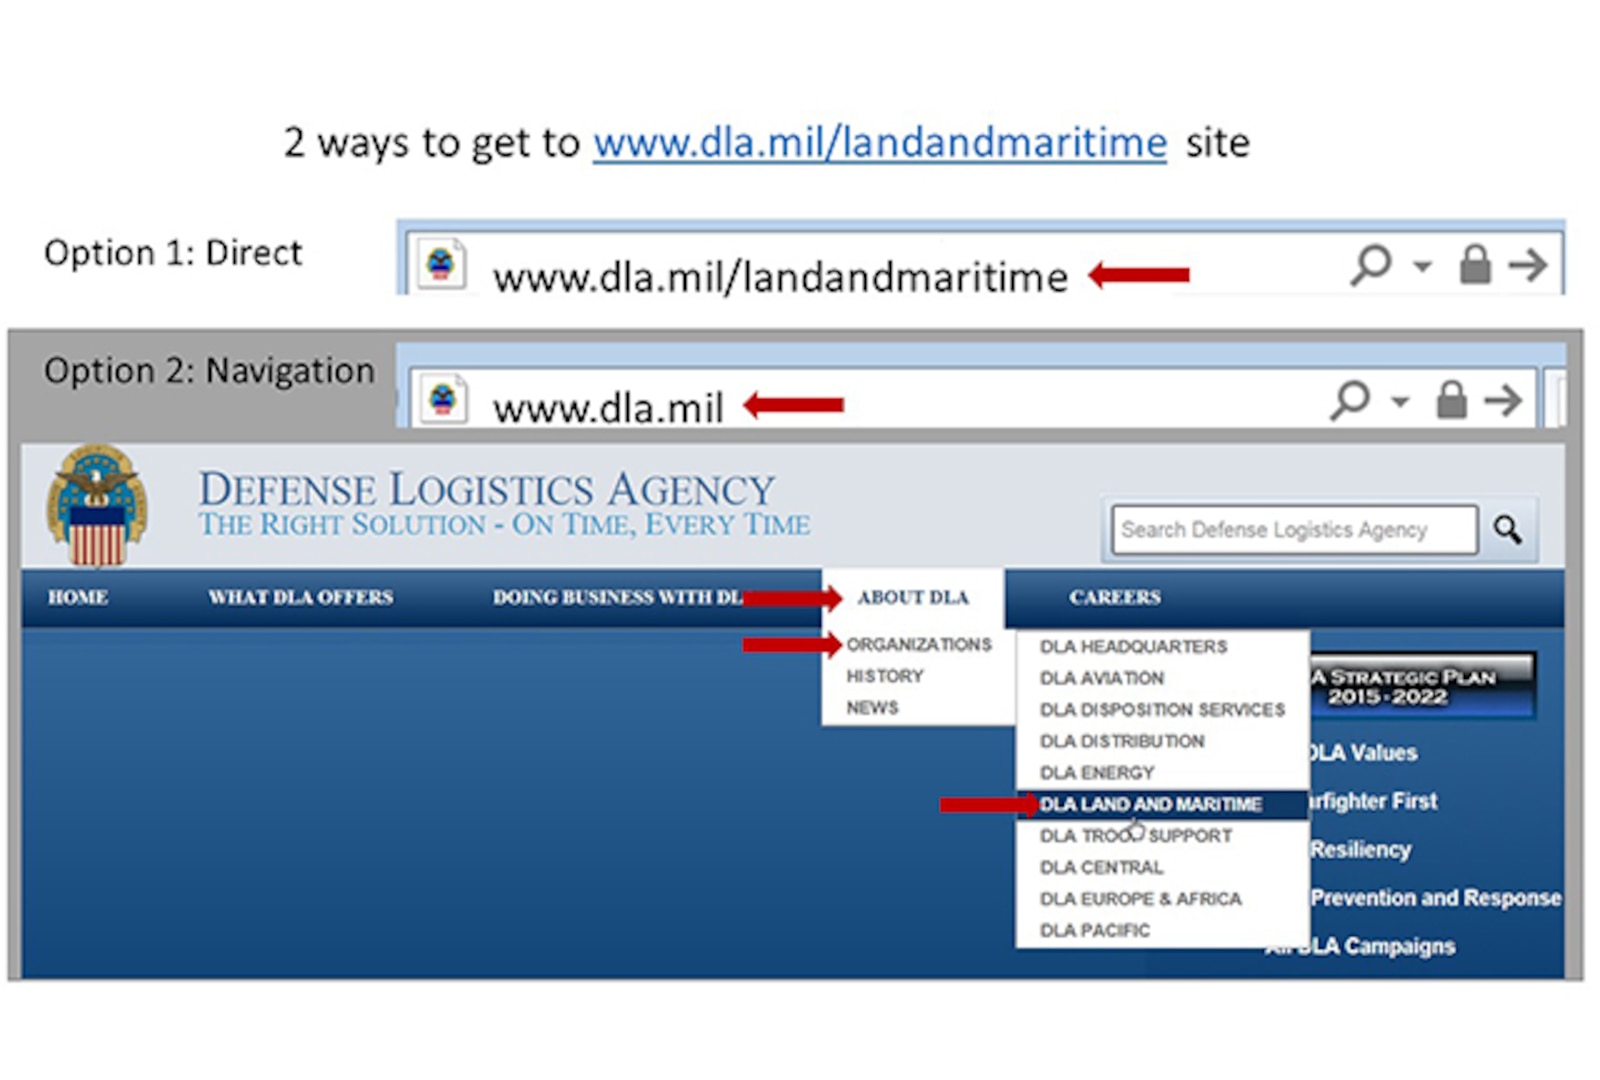 Slides showing how to navigate to DLA Land and Maritime home page.